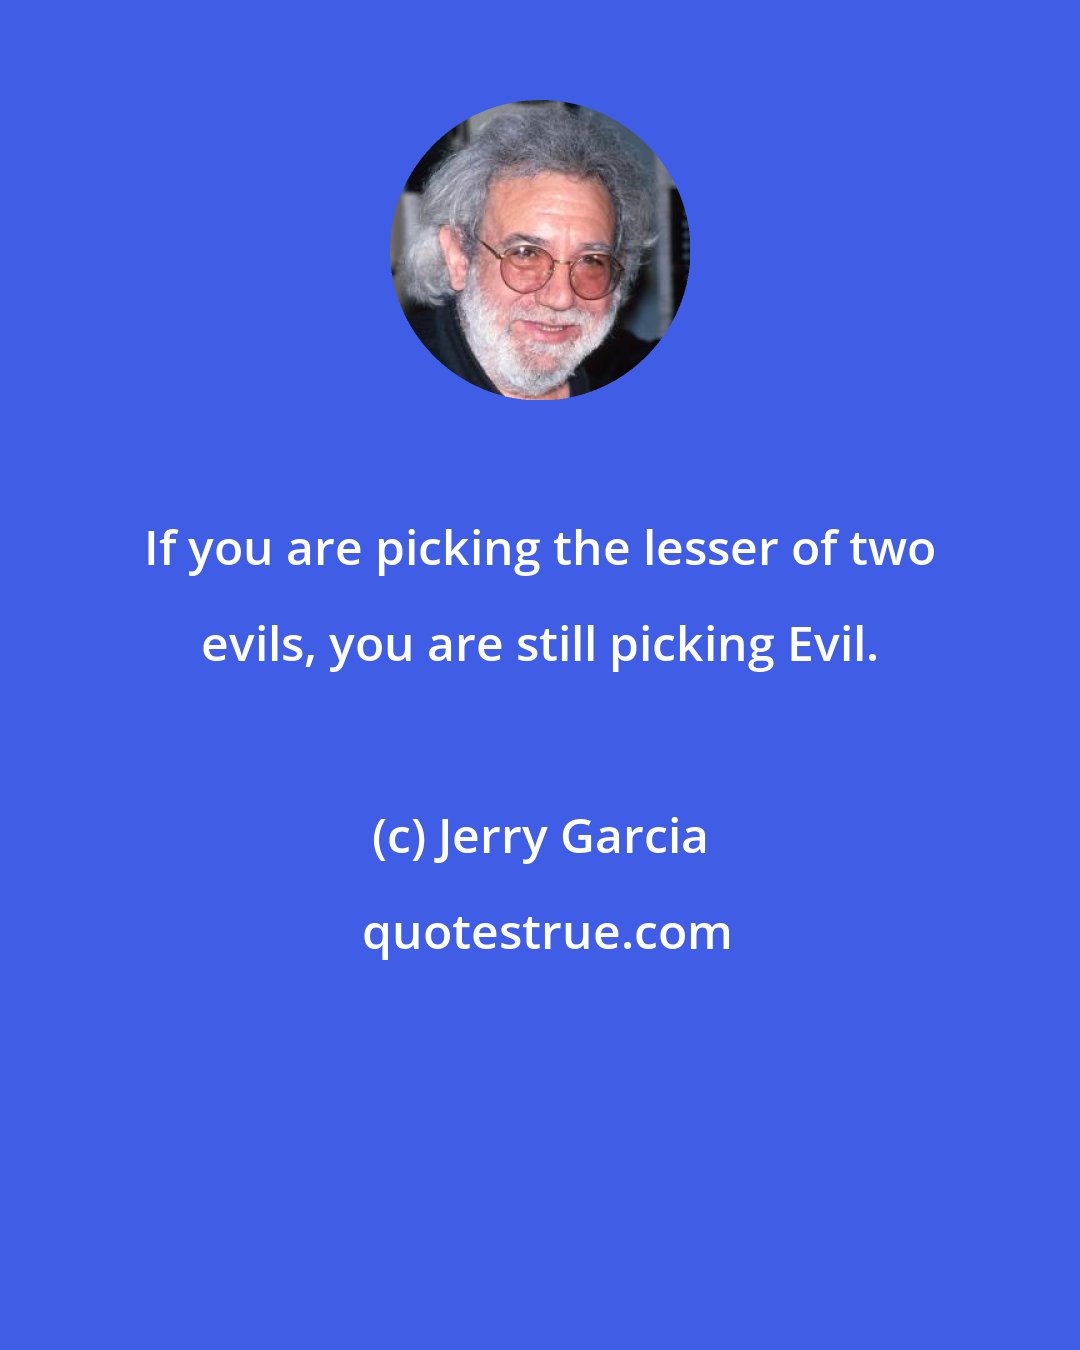 Jerry Garcia: If you are picking the lesser of two evils, you are still picking Evil.